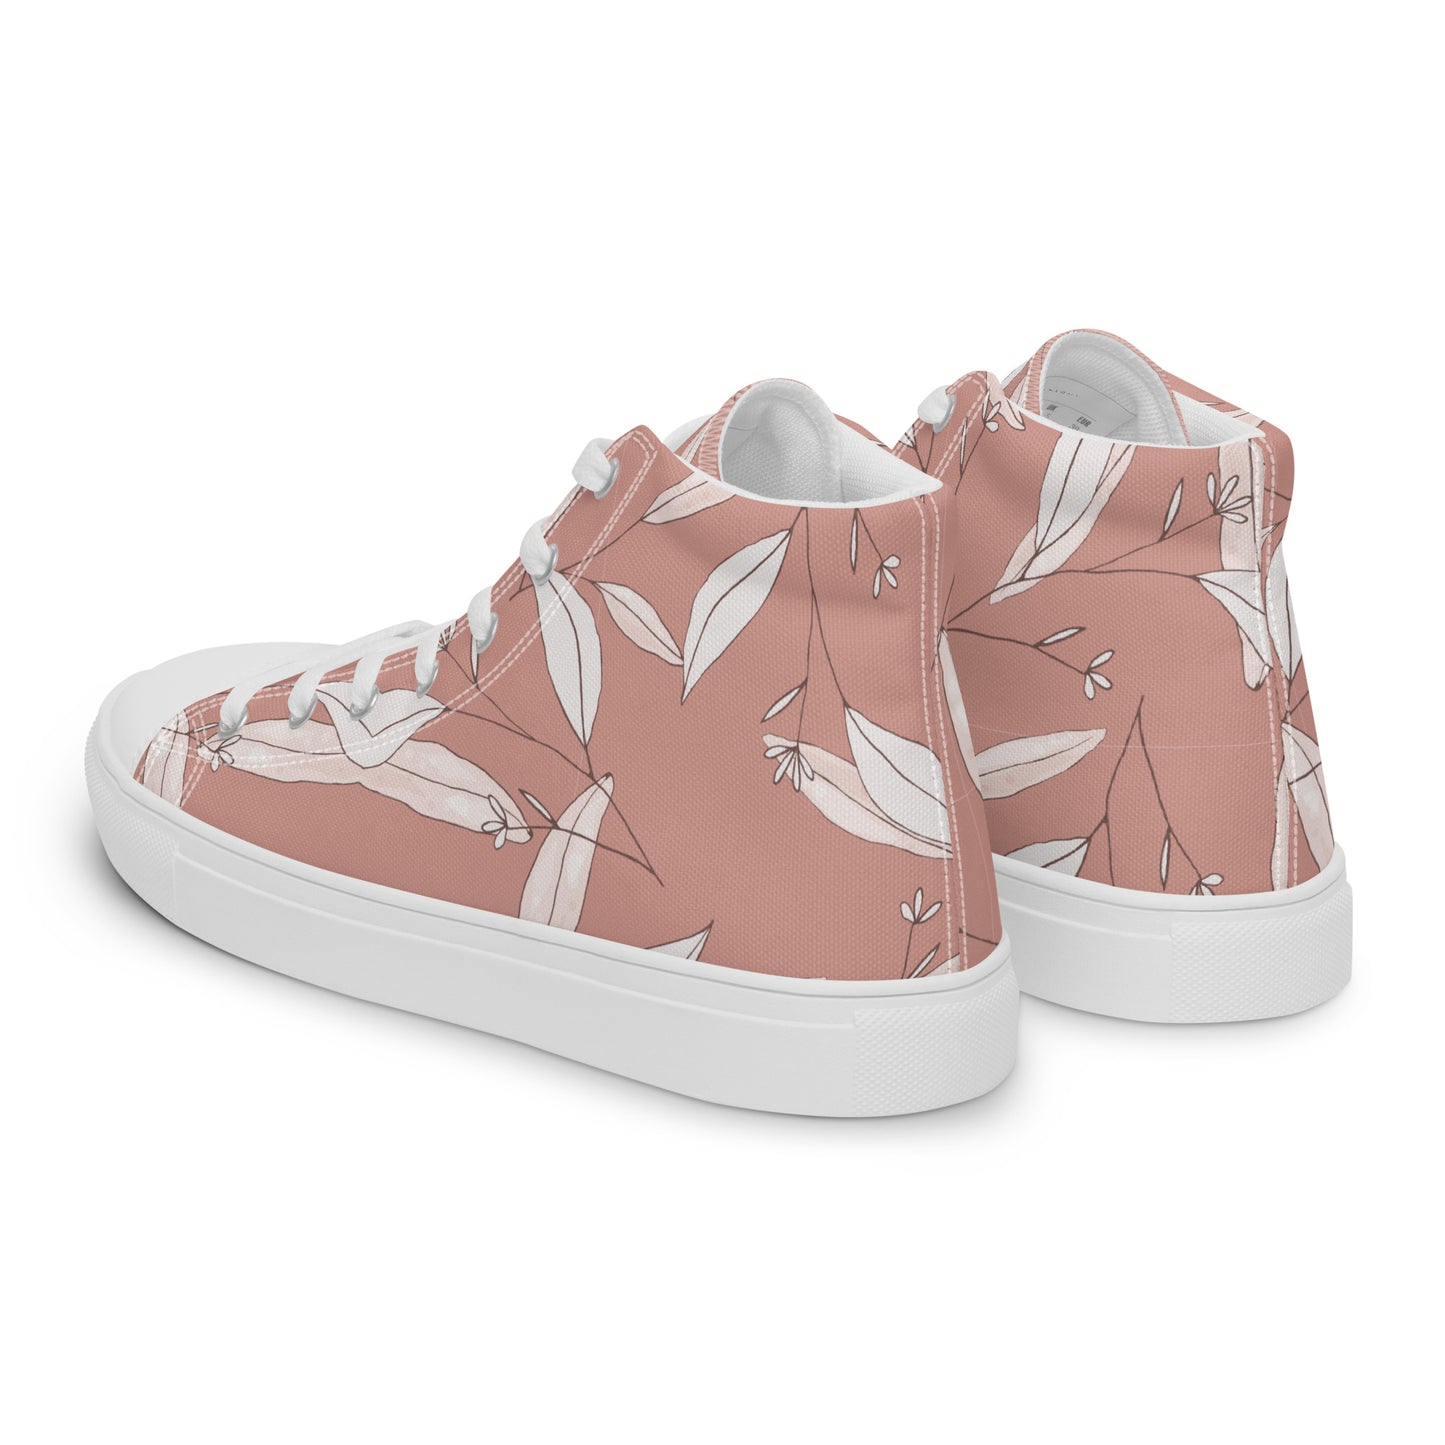 Feathered Finesse Women's High Top Canvas Shoes